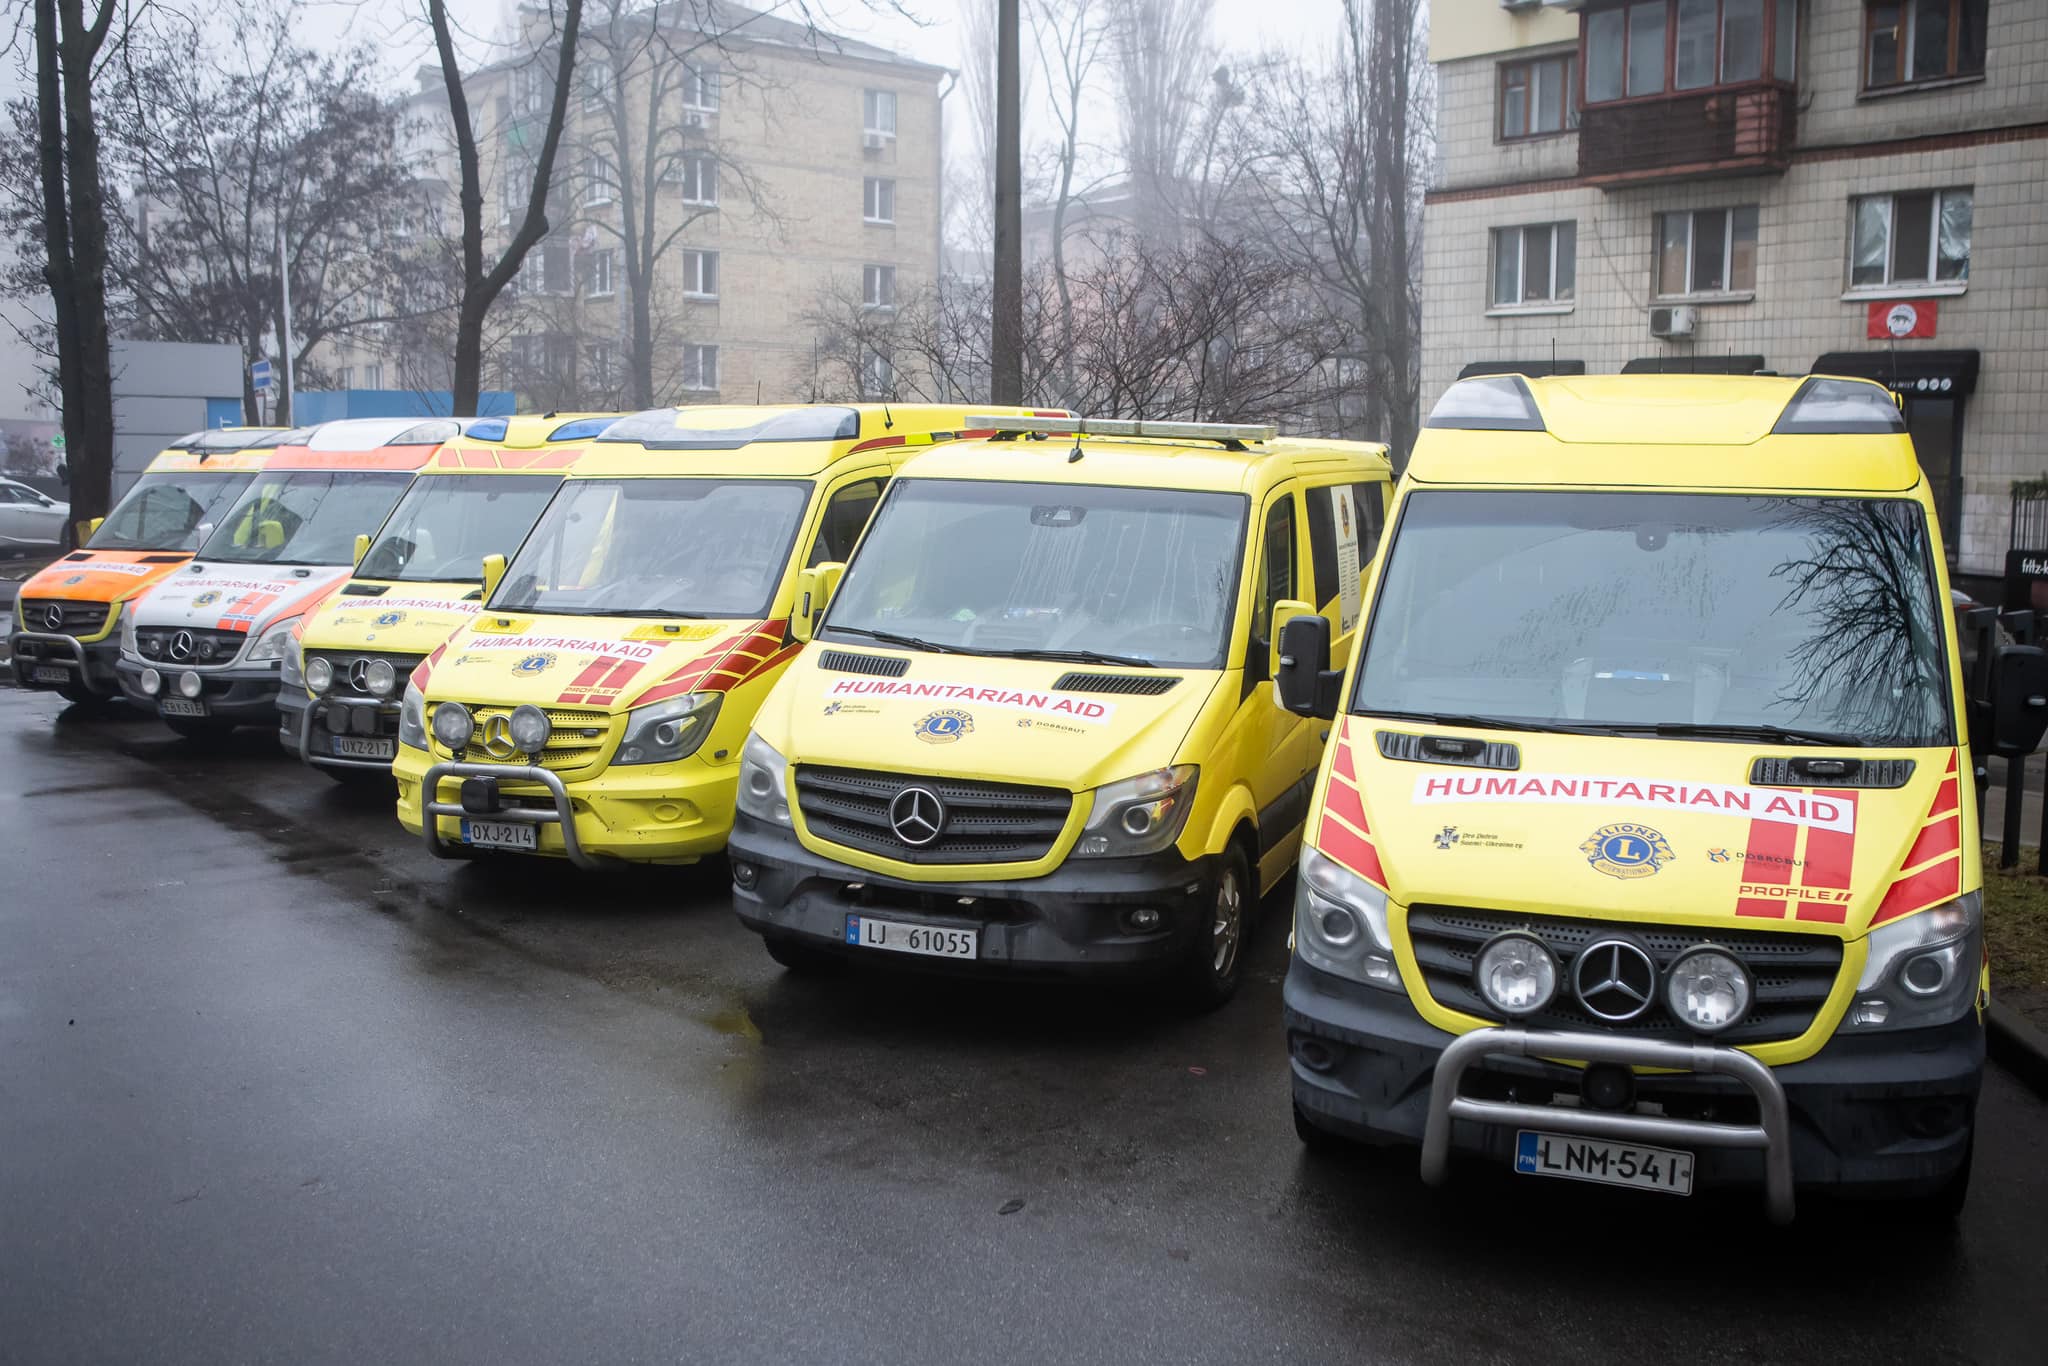 Finnish charitable organizations have donated six ambulances to the Dobrobut Foundation